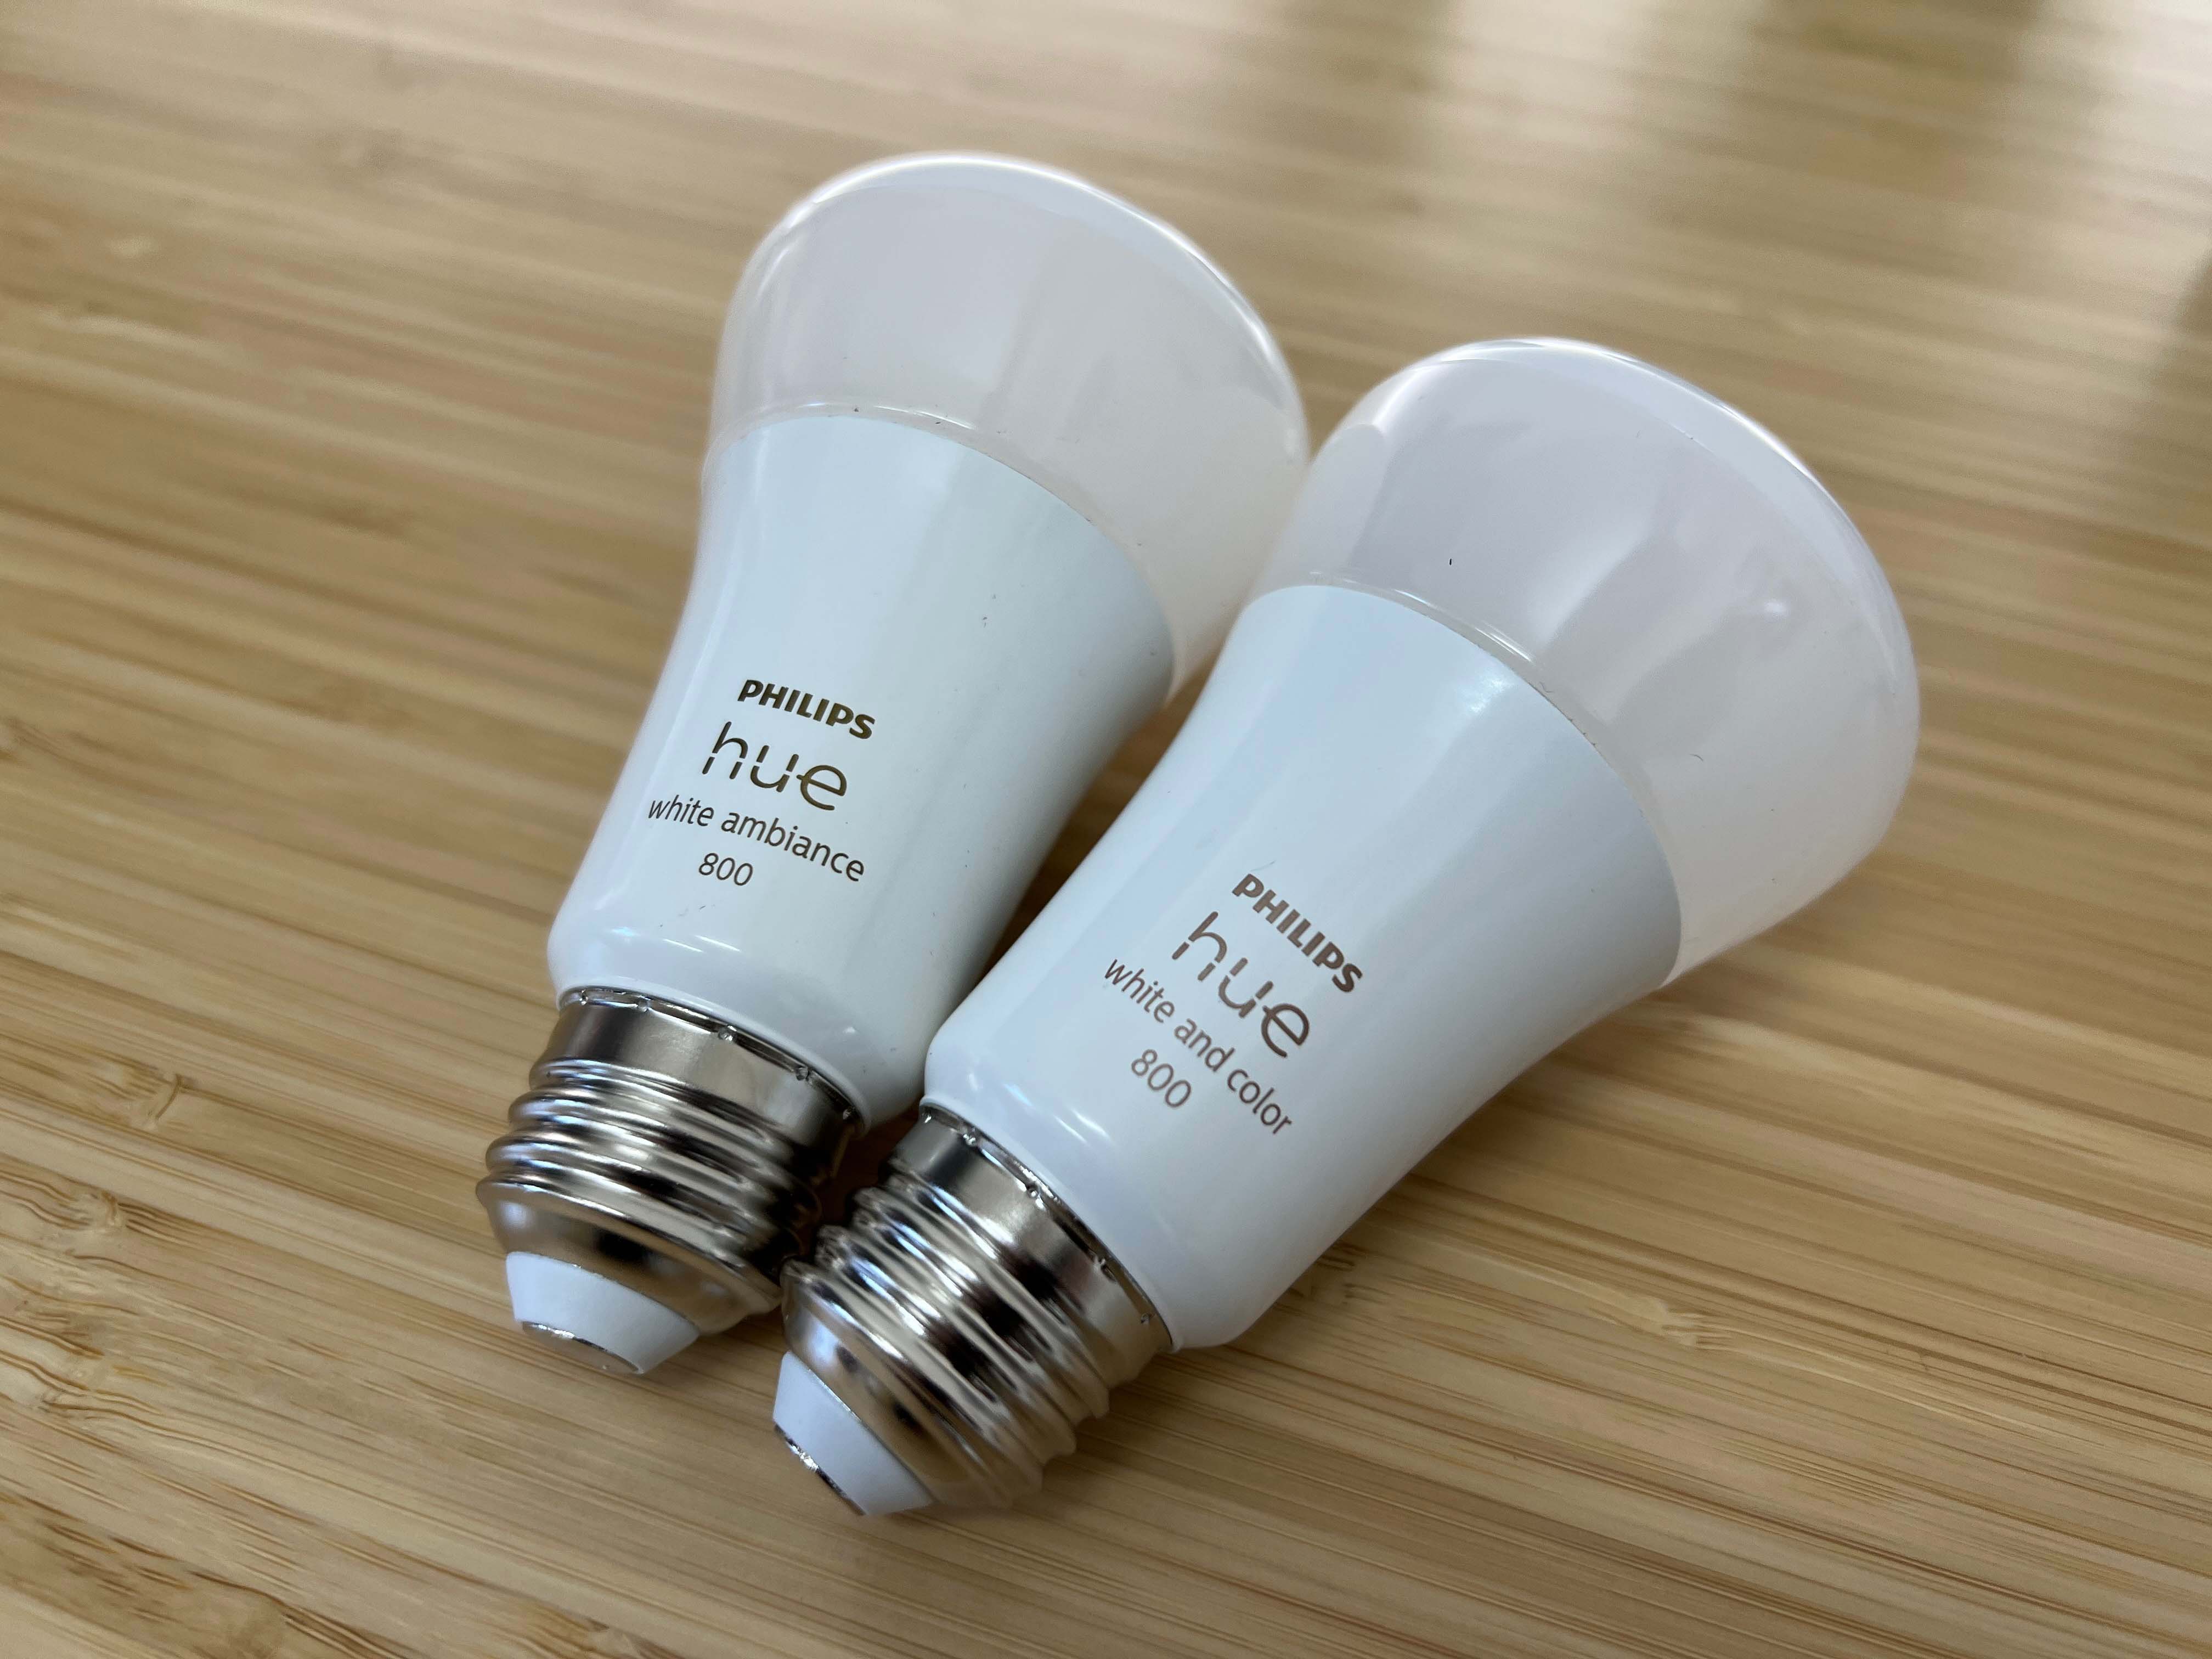 Is Philips Hue the Best Choice for a DIY Smart Lighting System